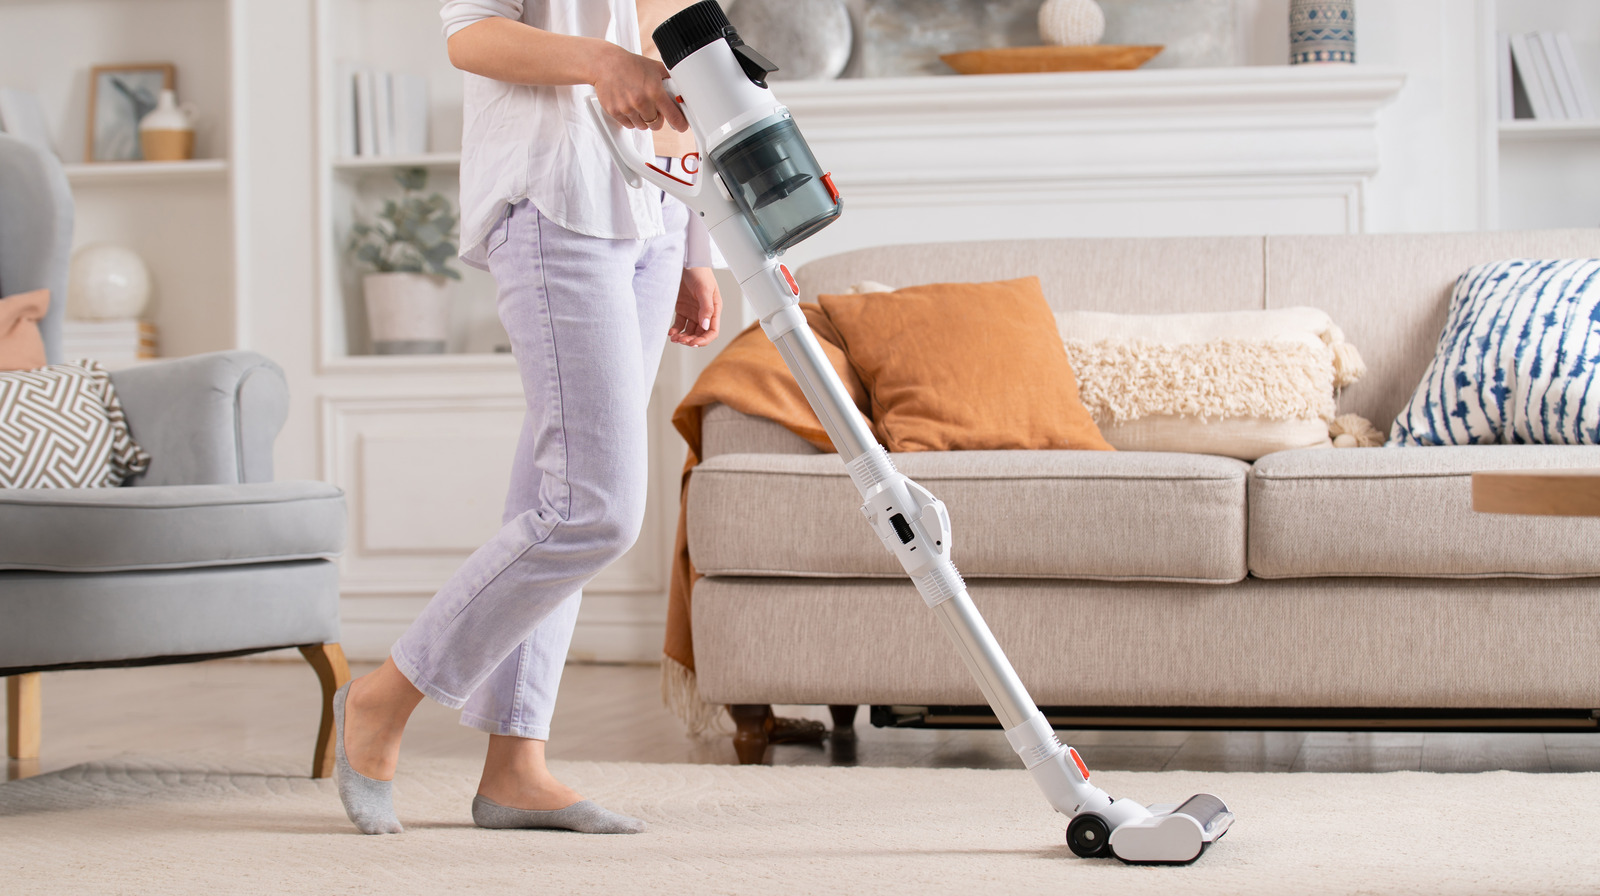 https://www.housedigest.com/img/gallery/are-cordless-vacuums-worth-the-hype/l-intro-1657020828.jpg